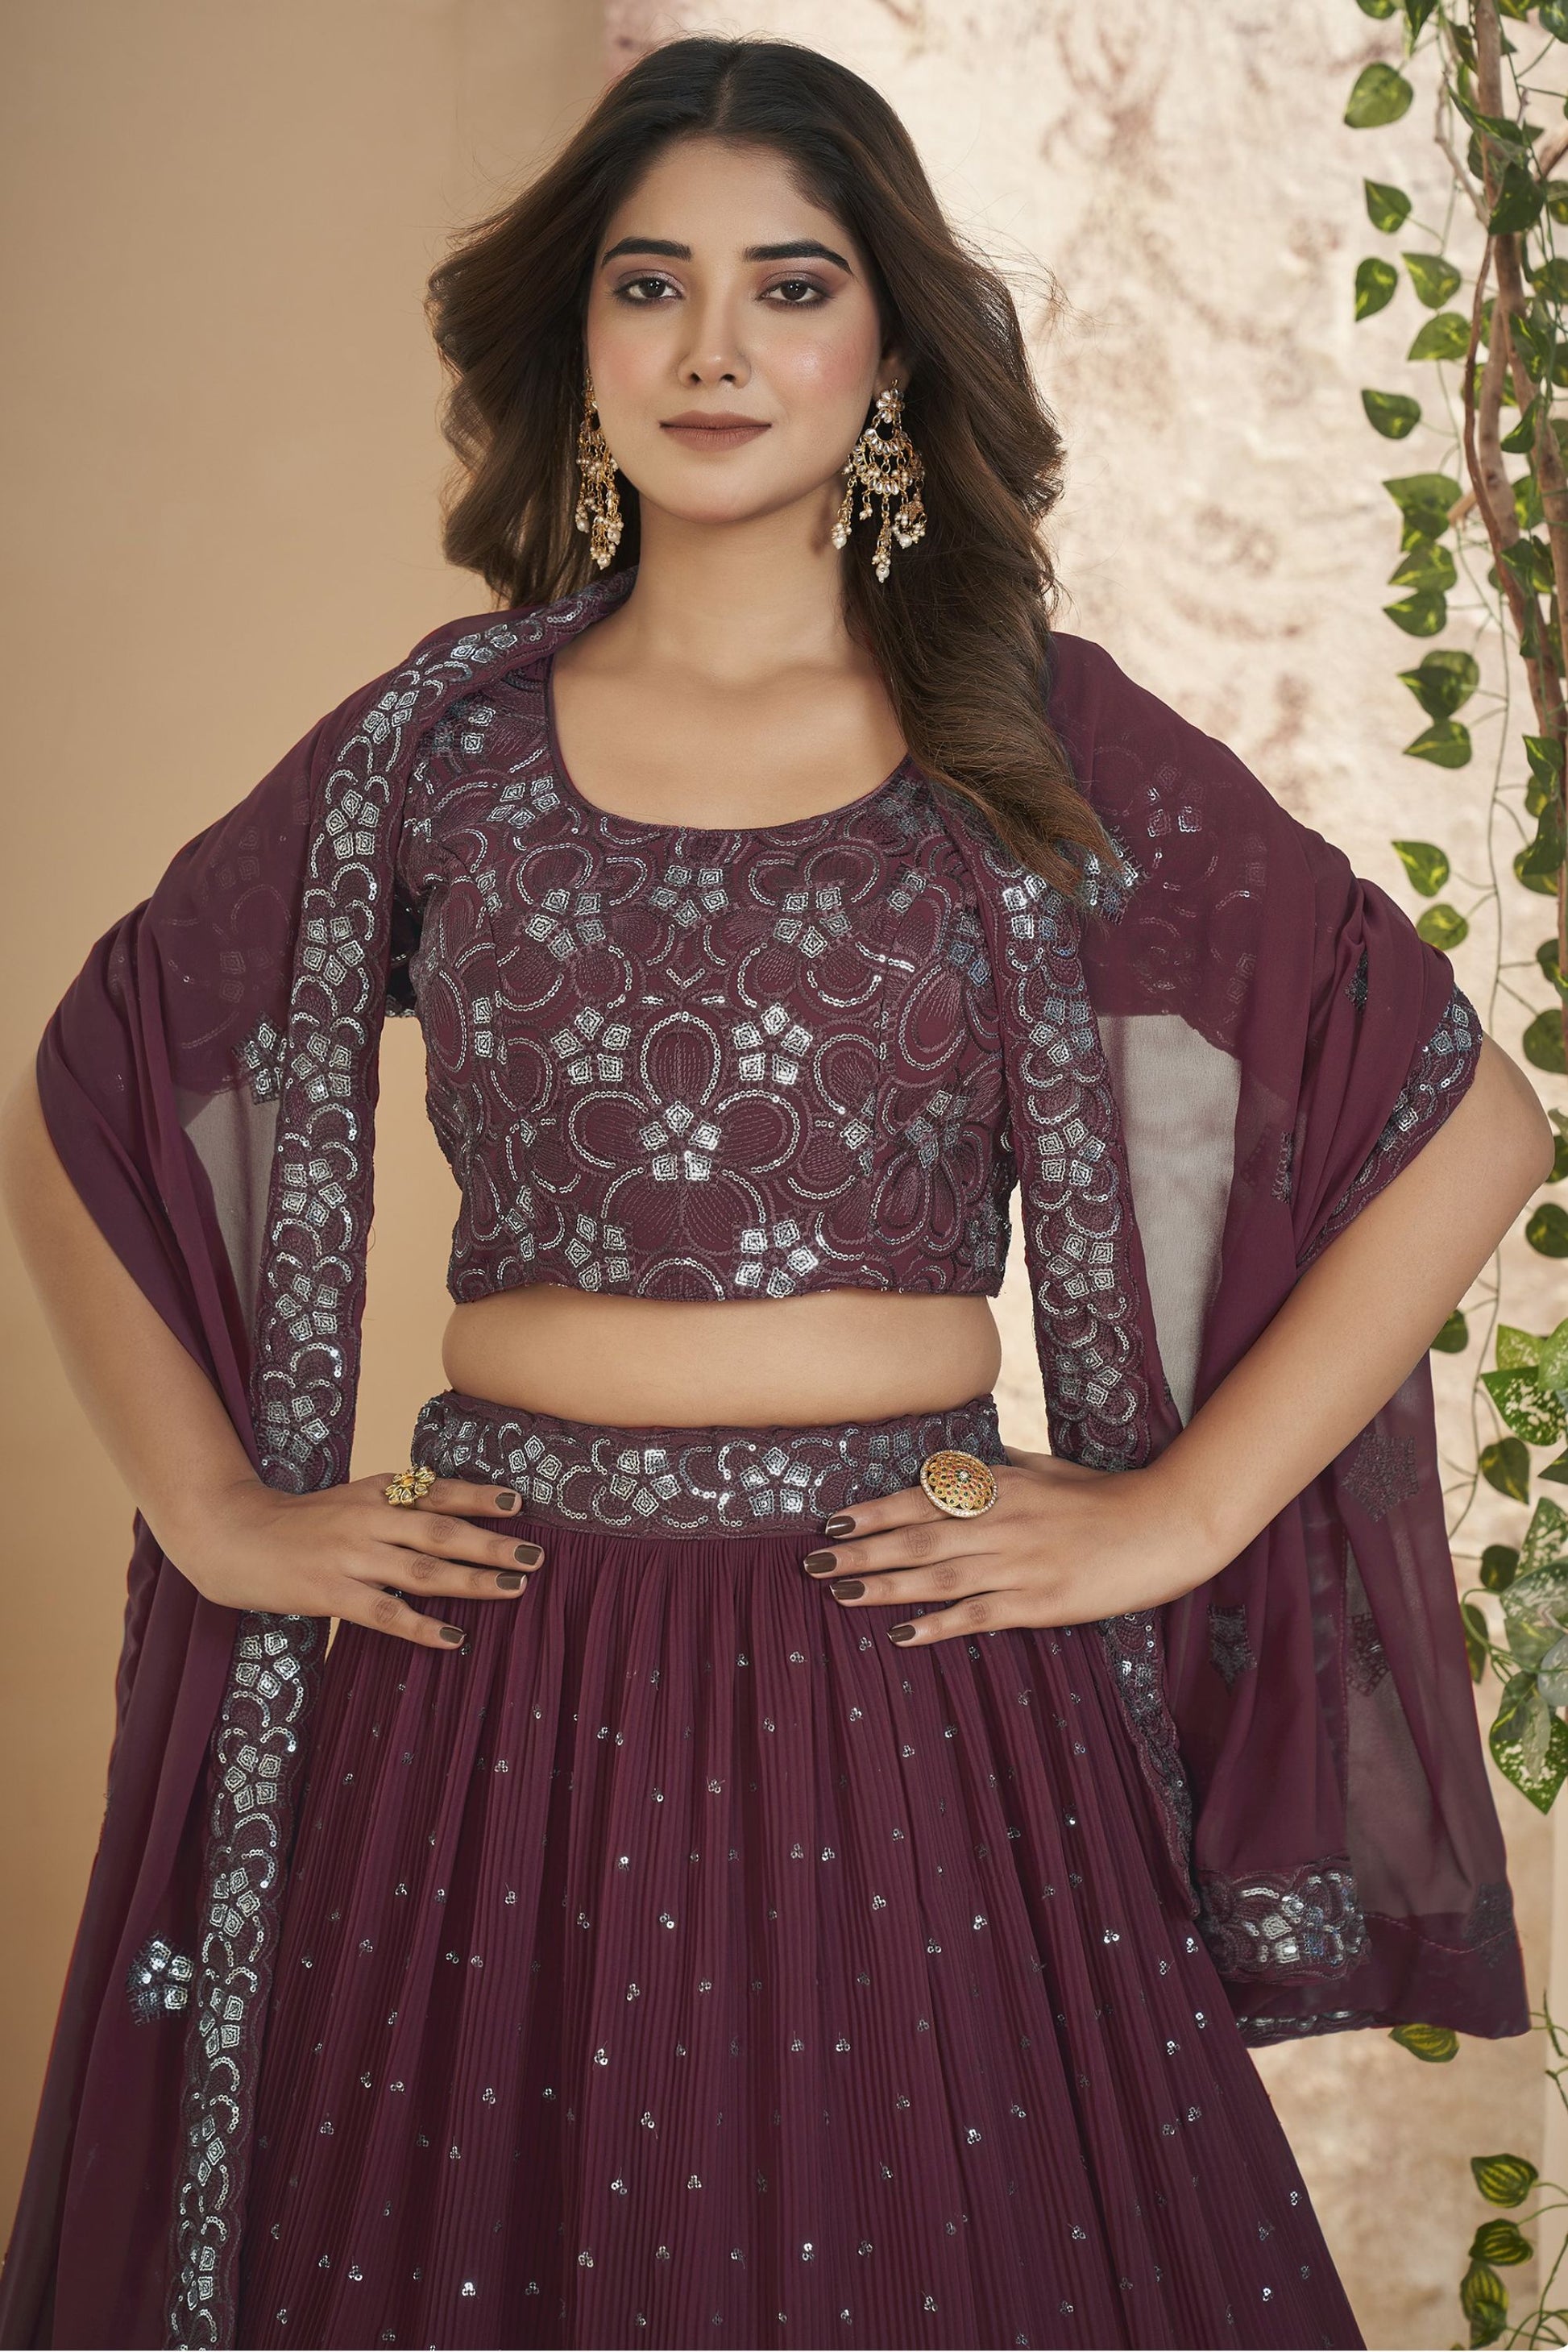 Maroon Georgette Ruffle Lehenga Choli 9 Meter Flair For Indian Festivals & Weddings - Sequence Embroidery Work, Thread Embroidery Work,